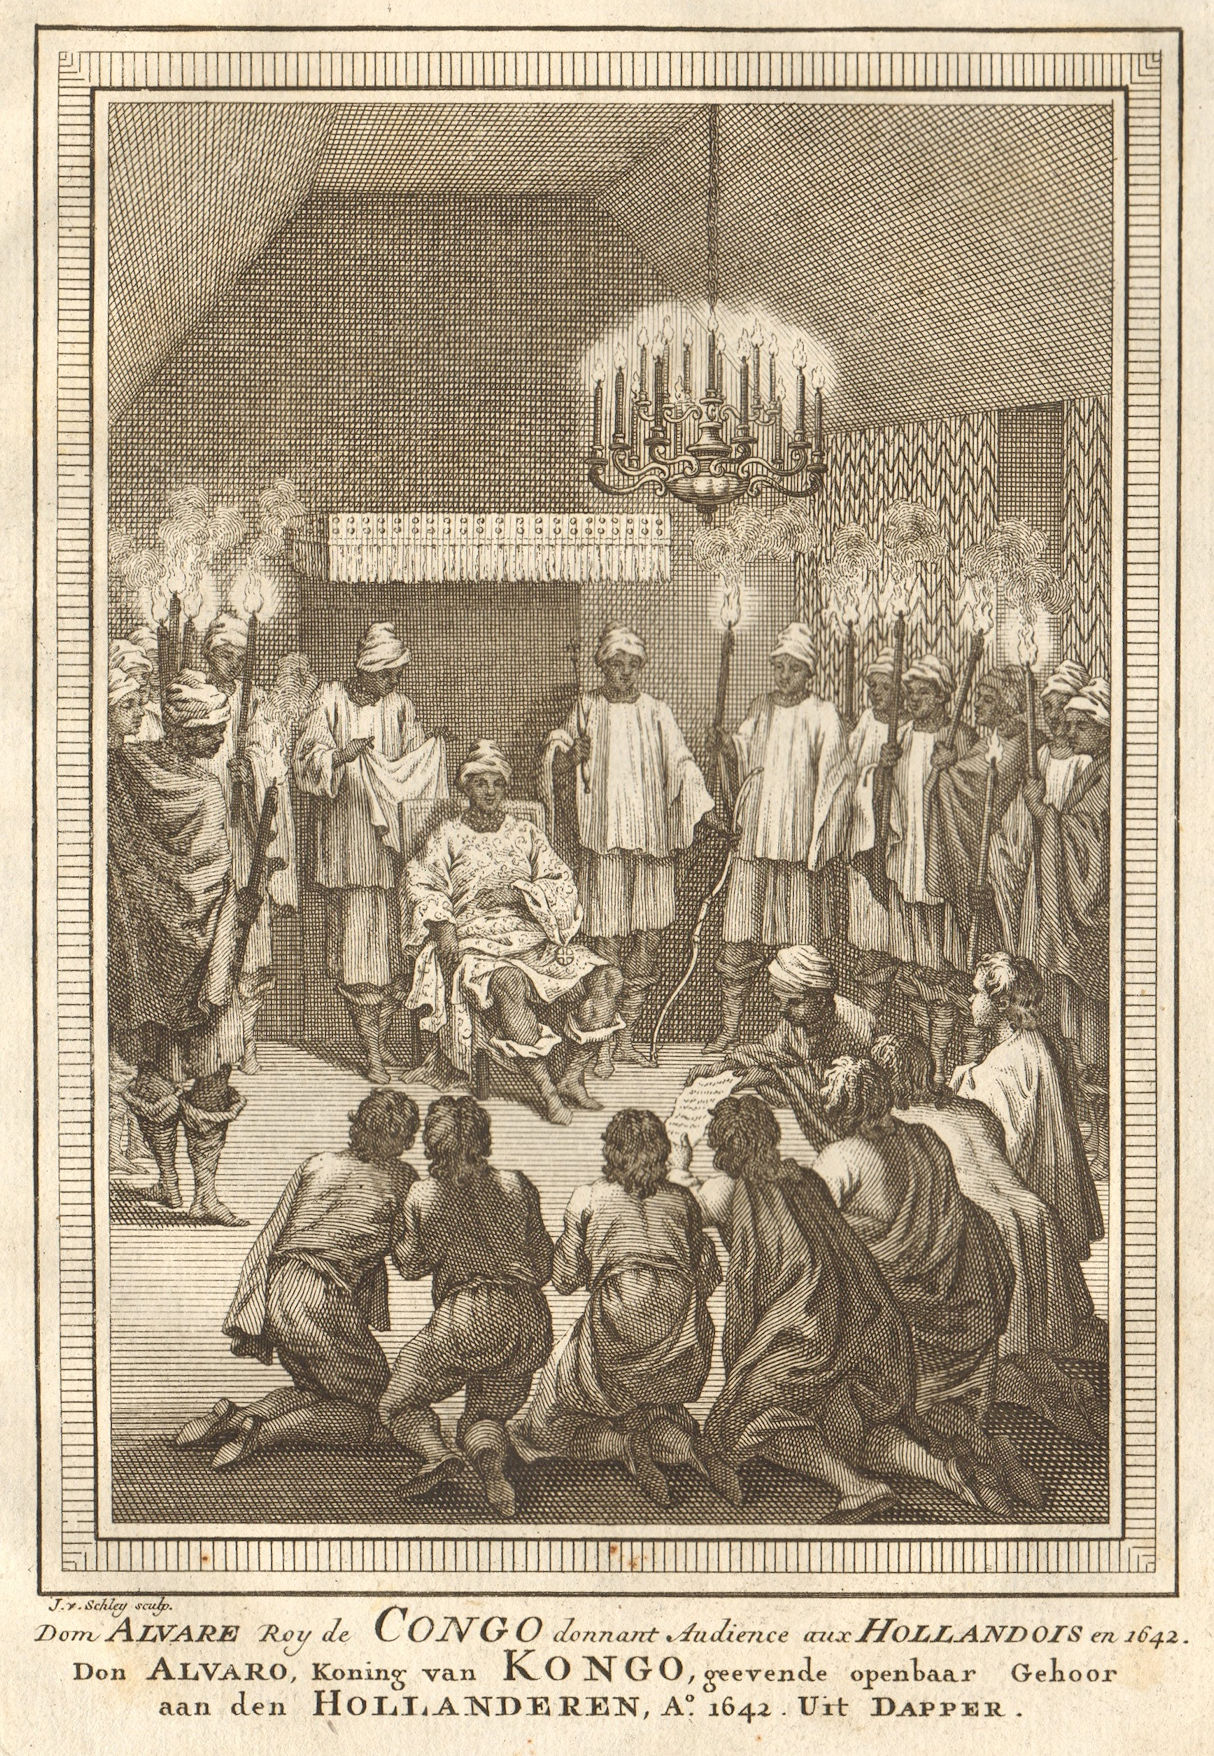 Associate Product King of Kongo (probably Alvaro VI), audience with the Dutch. Congo. SCHLEY 1748